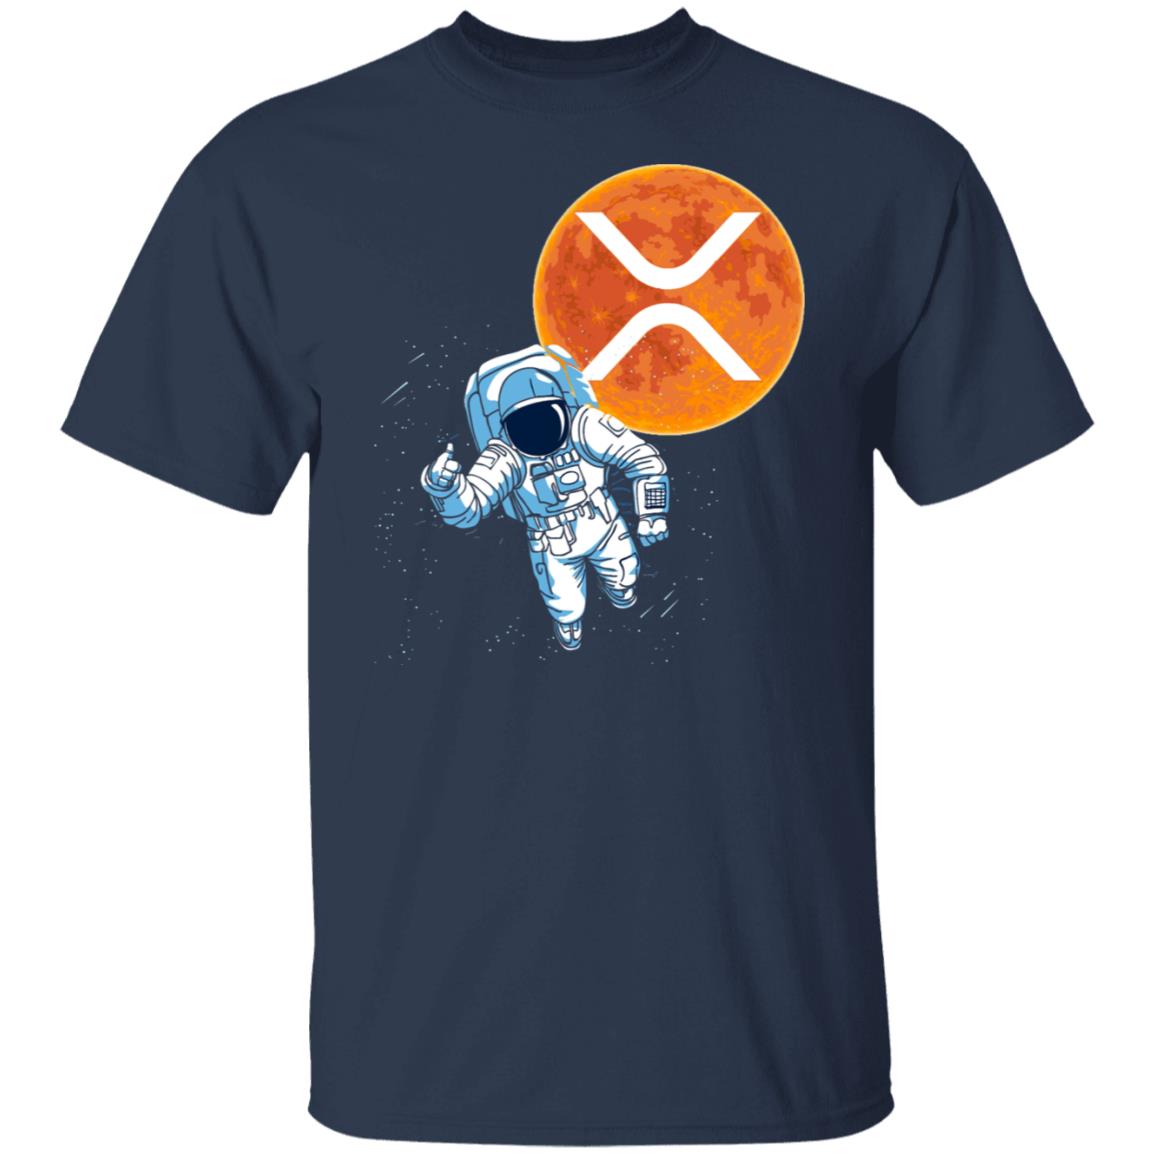 Xrp Ripple Astronaut To The Moon Cryptocurrency Crypto Shirt